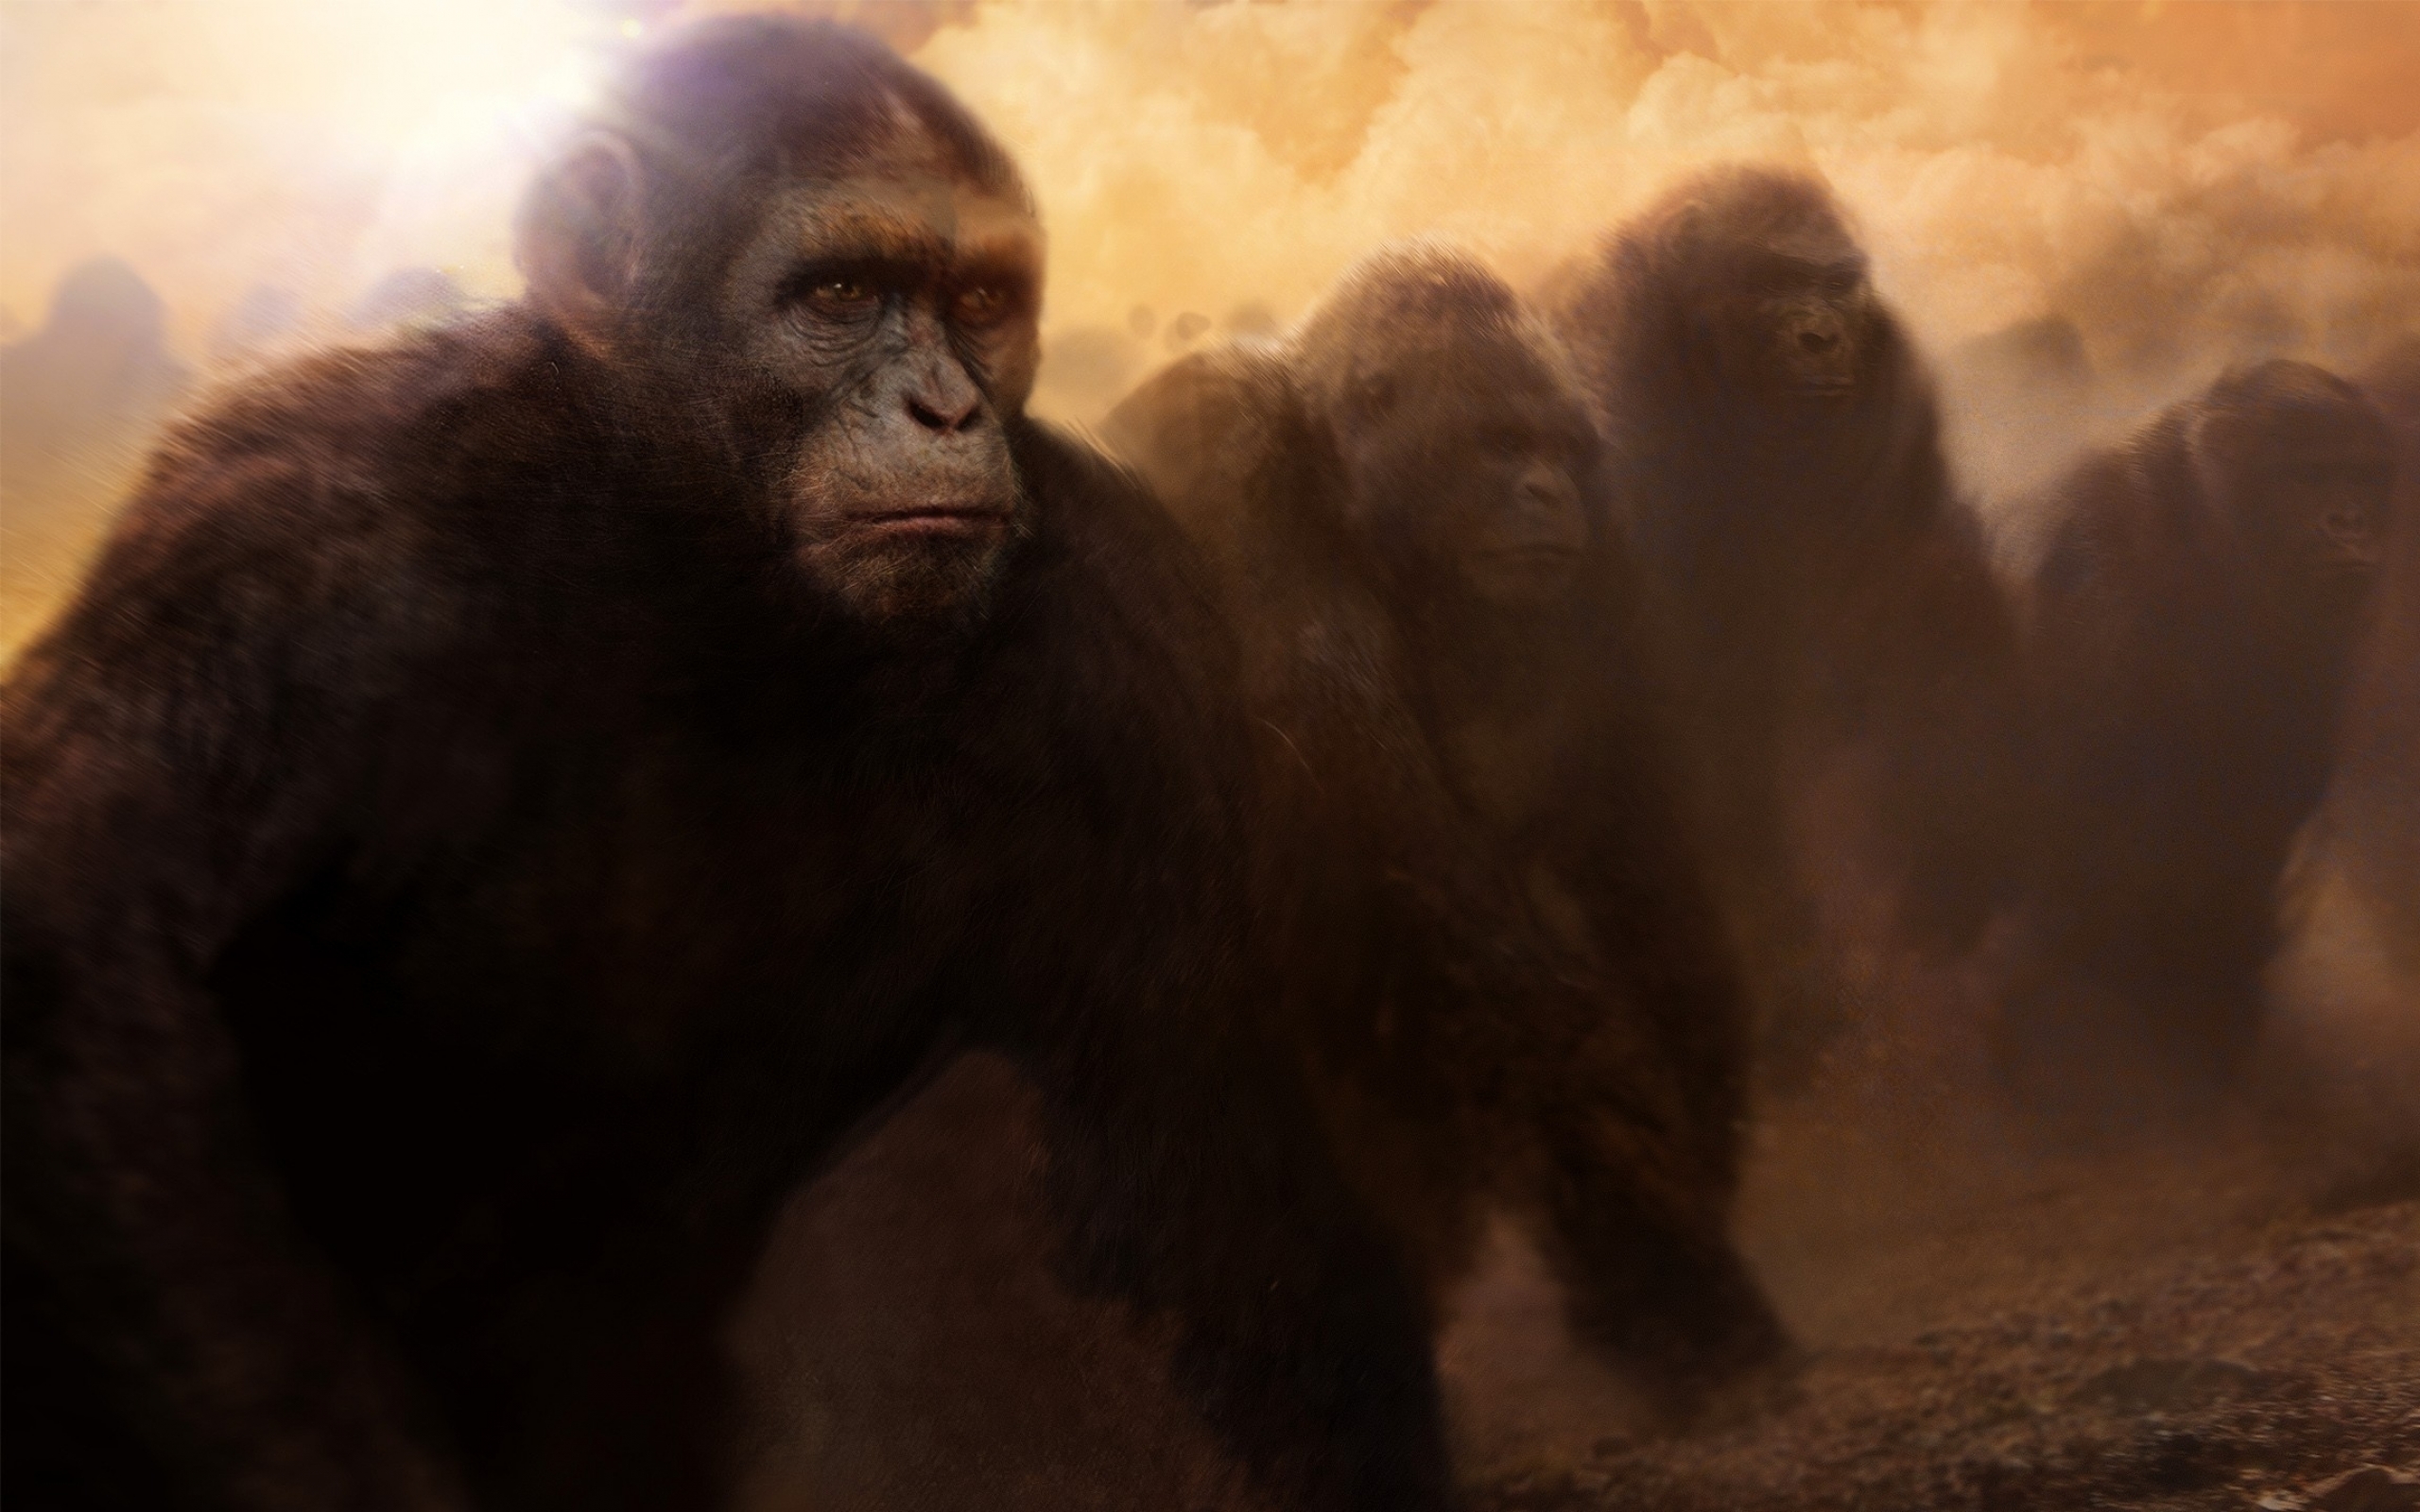 Movie Rise Of The Planet Of The Apes HD Wallpaper | Background Image